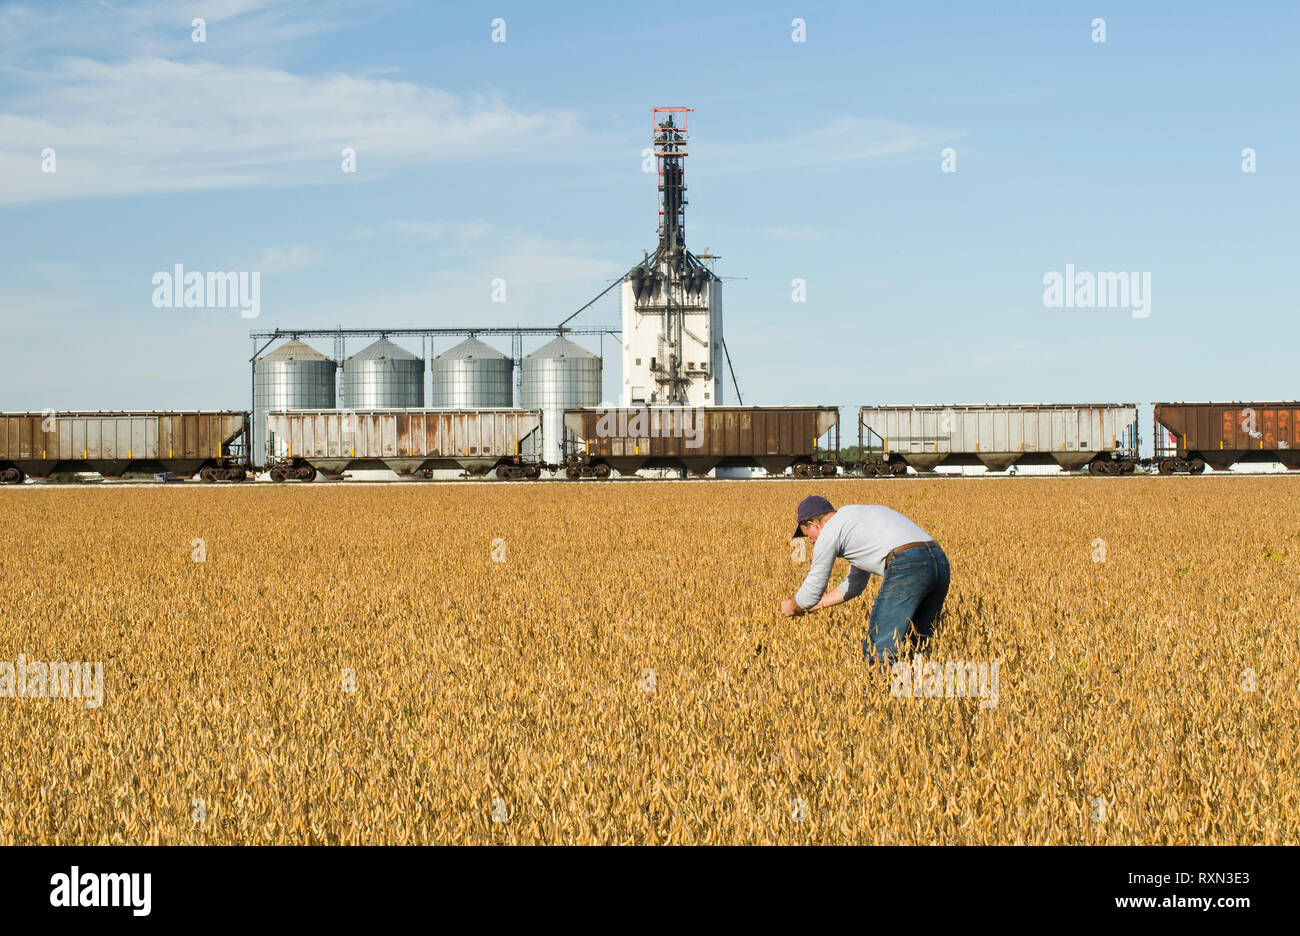 a man scouts a mature, harvest ready soybean field with an inland grain terminal in the background, near Rosser, Manitoba, Canada Stock Photo